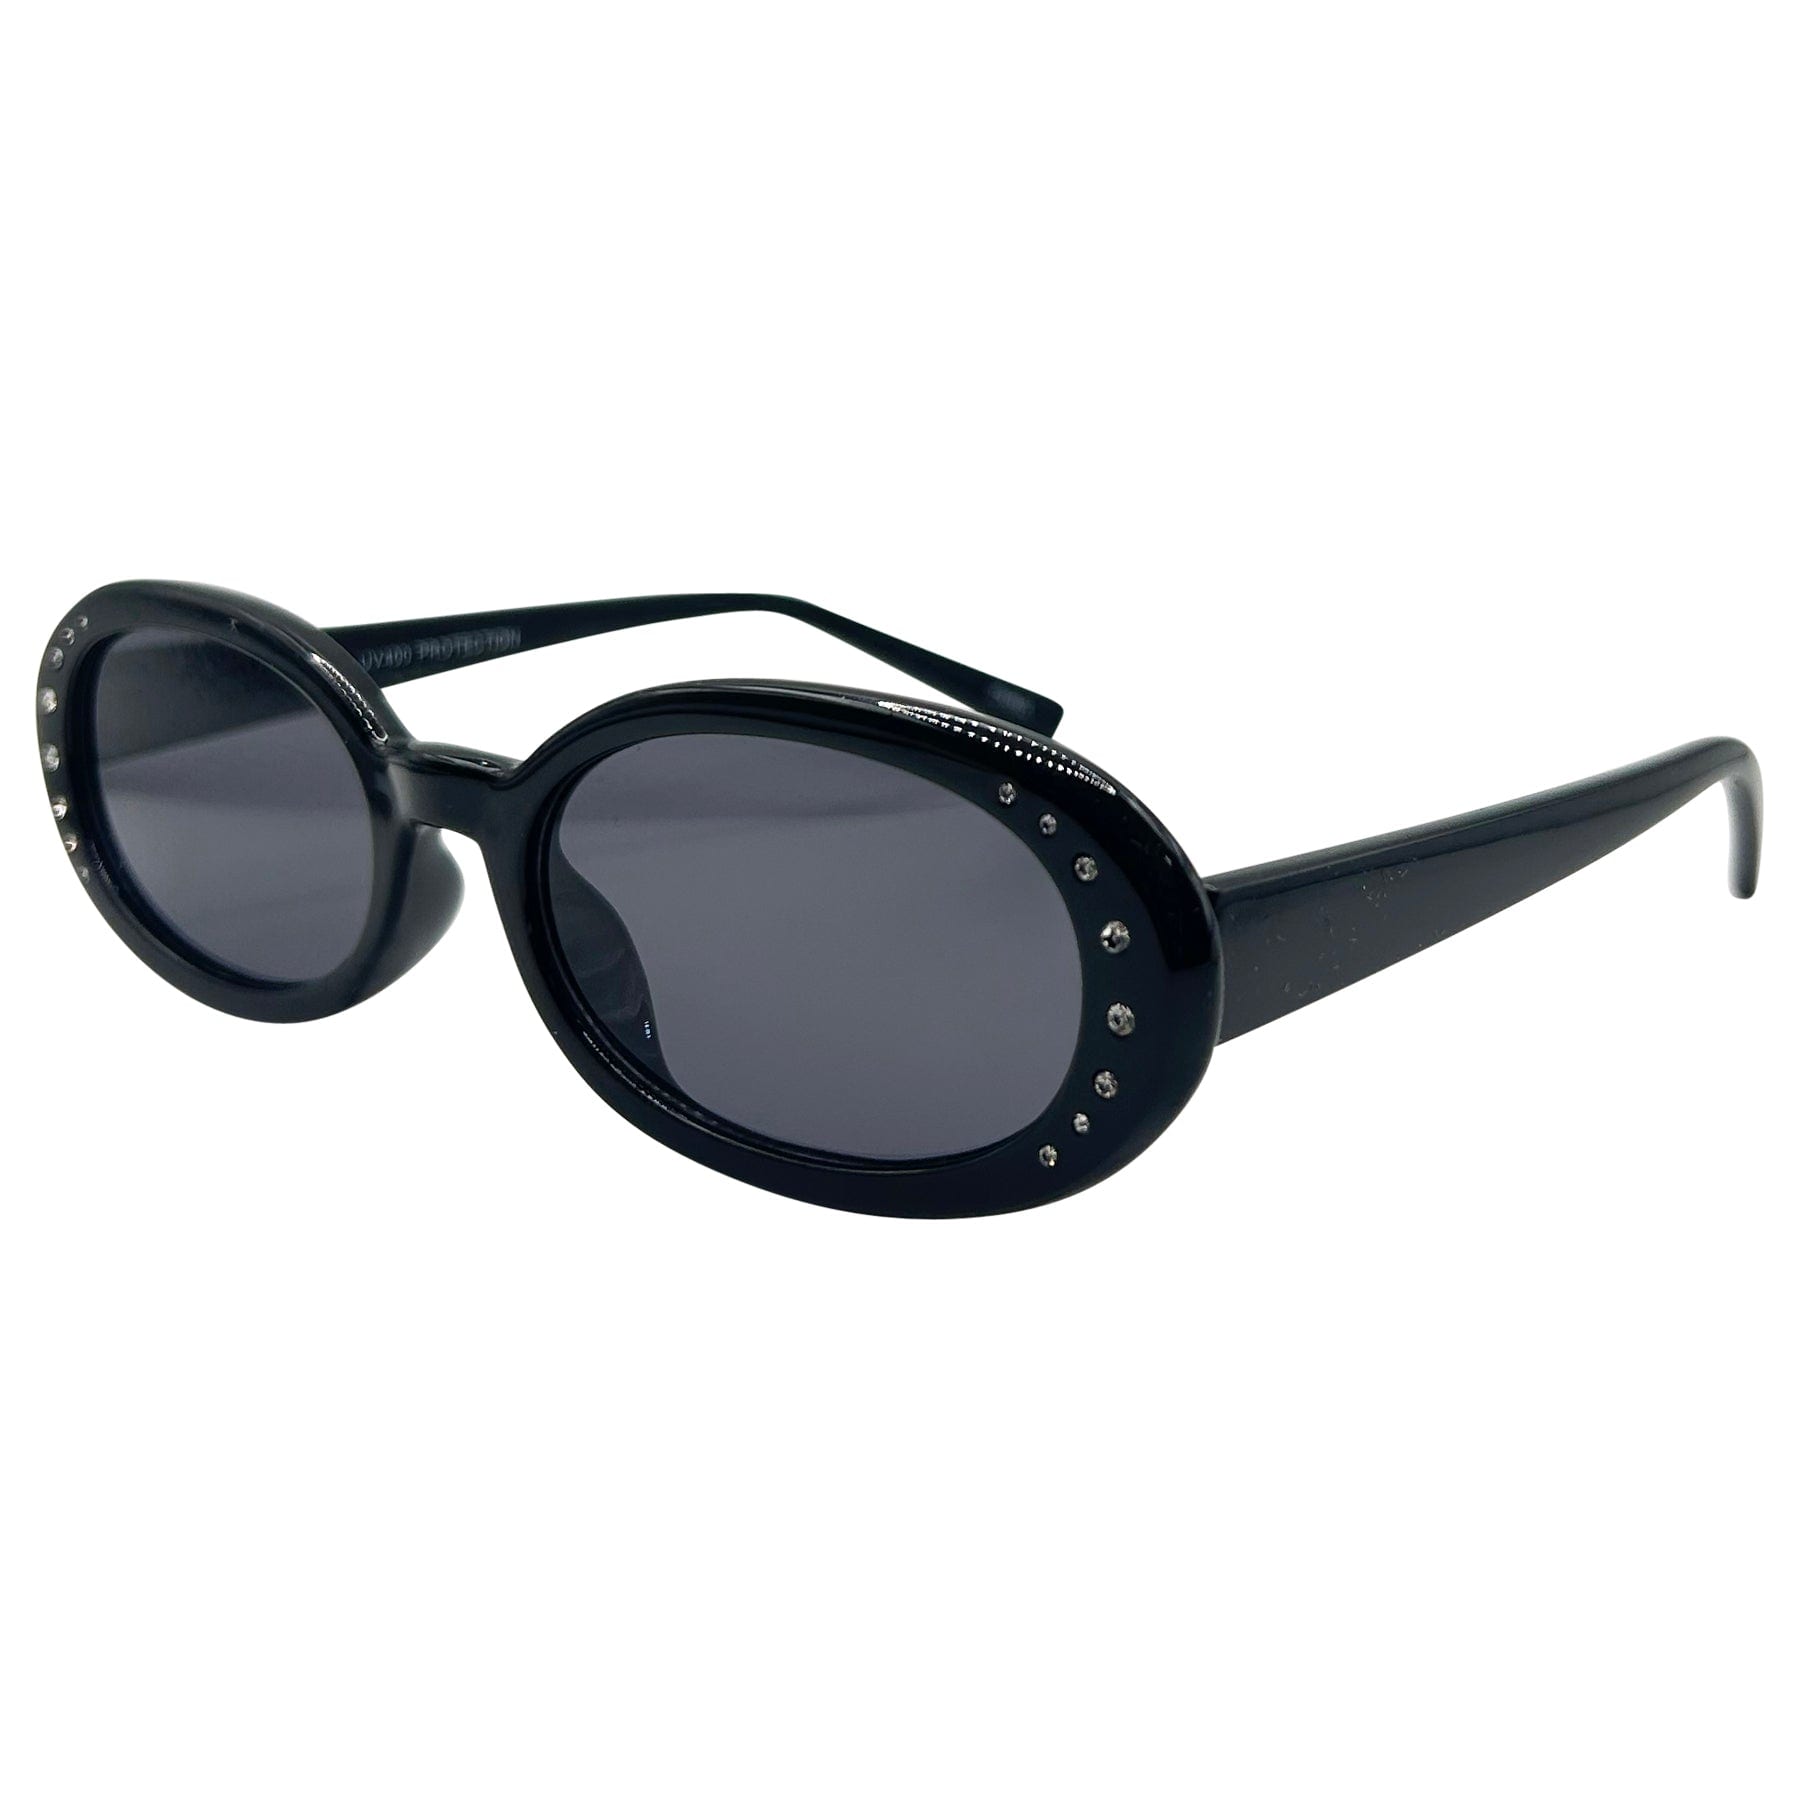 90s oval sunglasses style frame with rhinestones and a gloss black finish